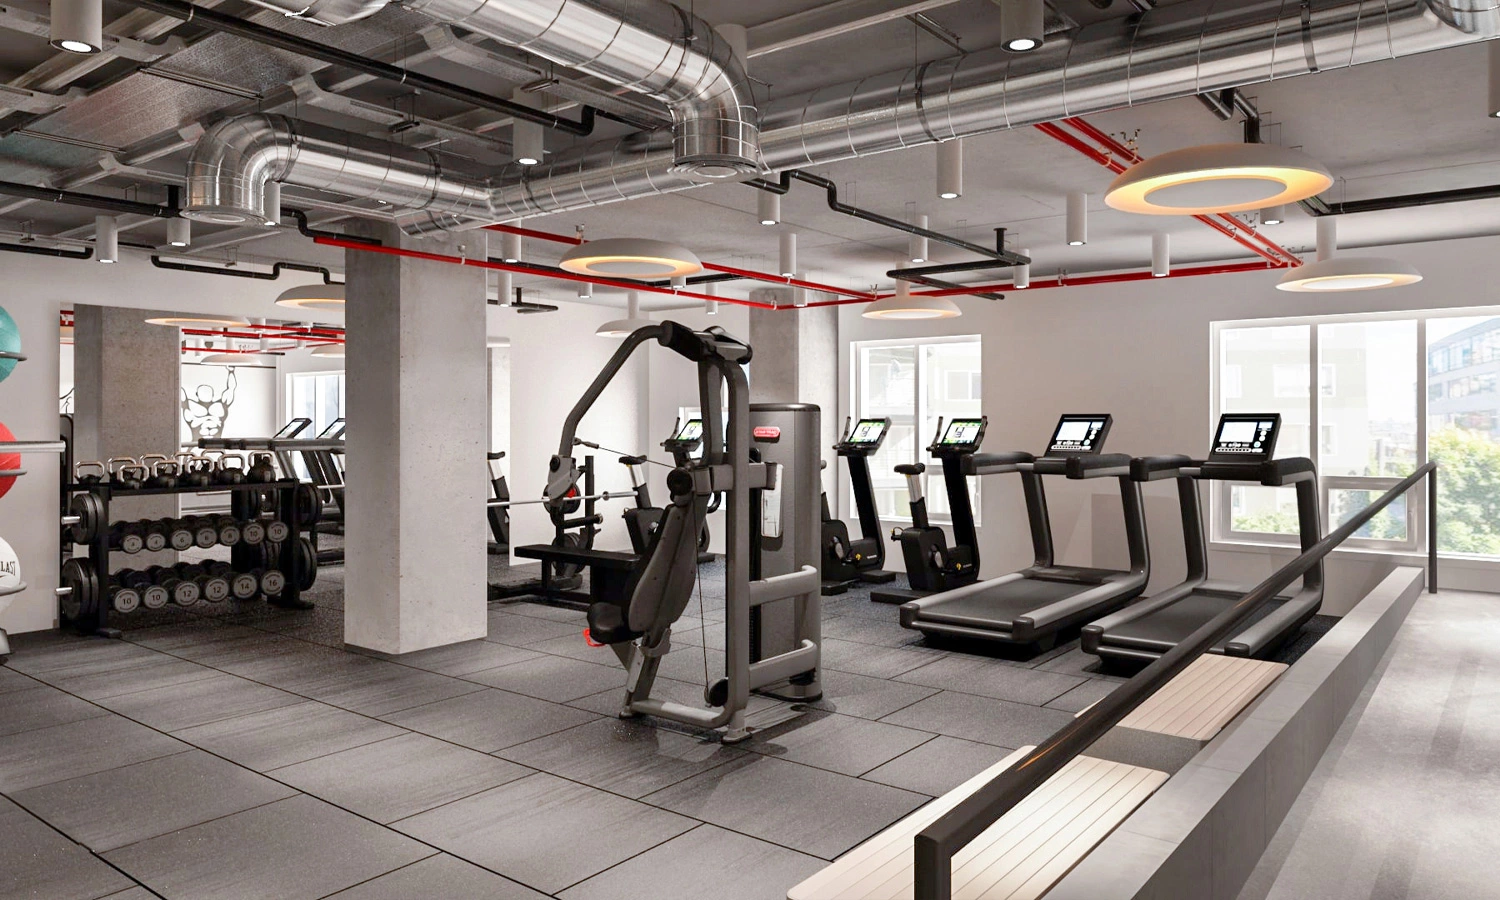 Power-packed gym interior design by Ariana Adireh